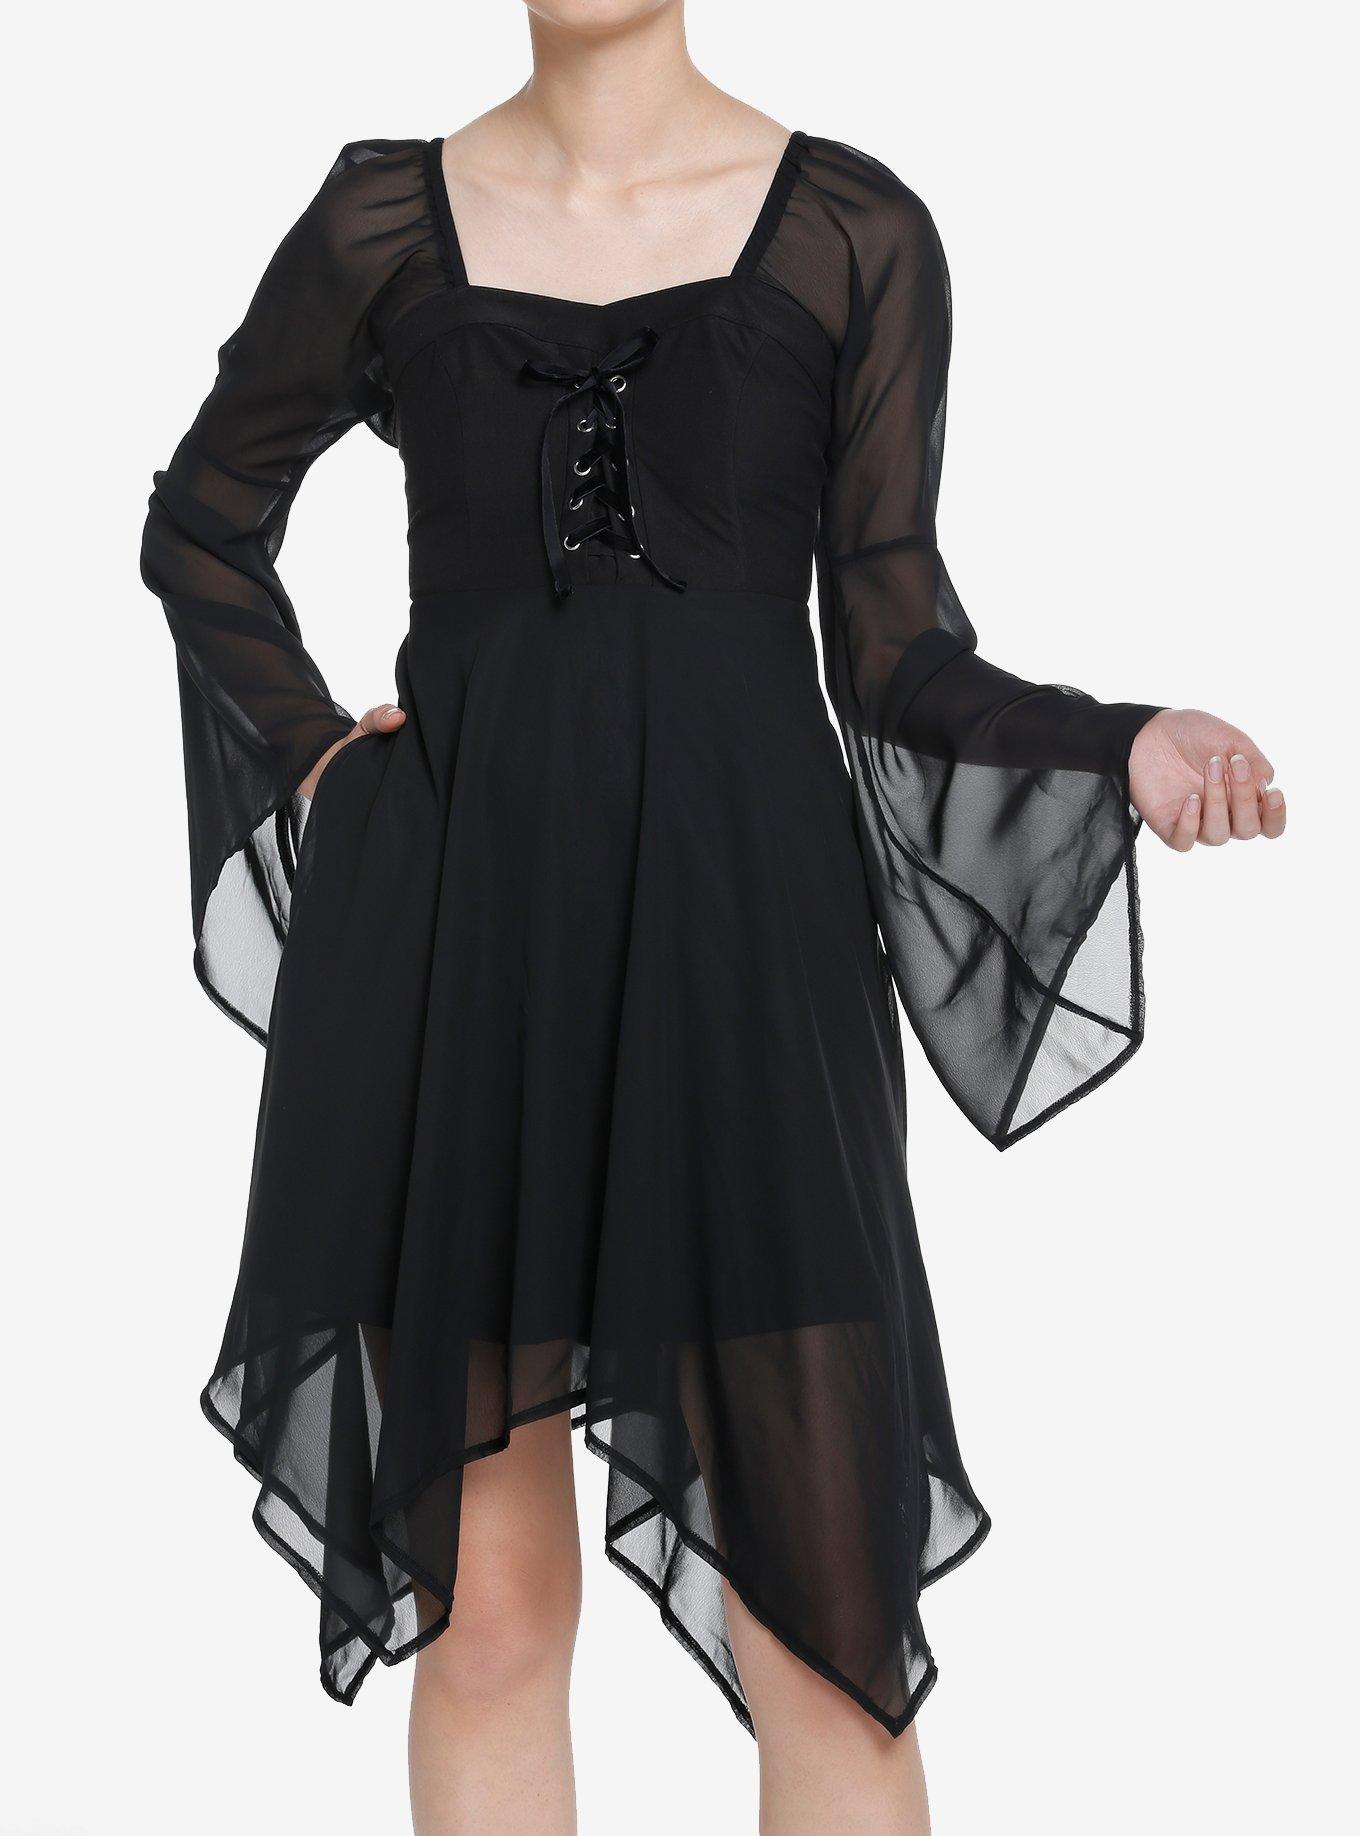 Cosmic Aura Black Lace-Up Bell Sleeve Dress | Hot Topic